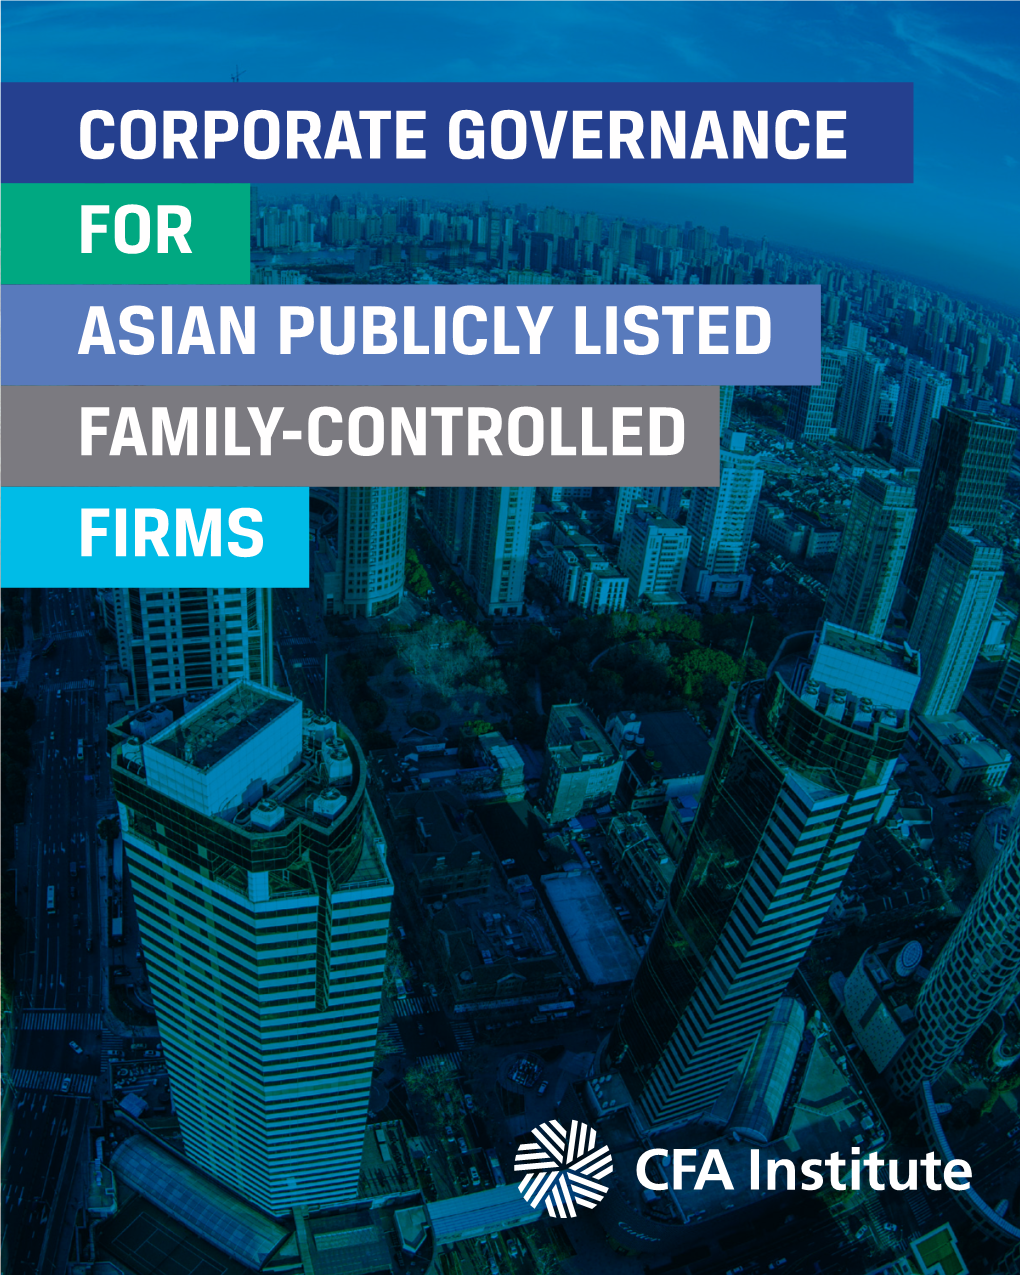 CORPORATE GOVERNANCE for ASIAN PUBLICLY LISTED FAMILY-CONTROLLED FIRMS CORPORATE GOVERNANCE for ASIAN PUBLICLY LISTED FAMILY-CONTROLLED FIRMS © 2017 CFA Institute